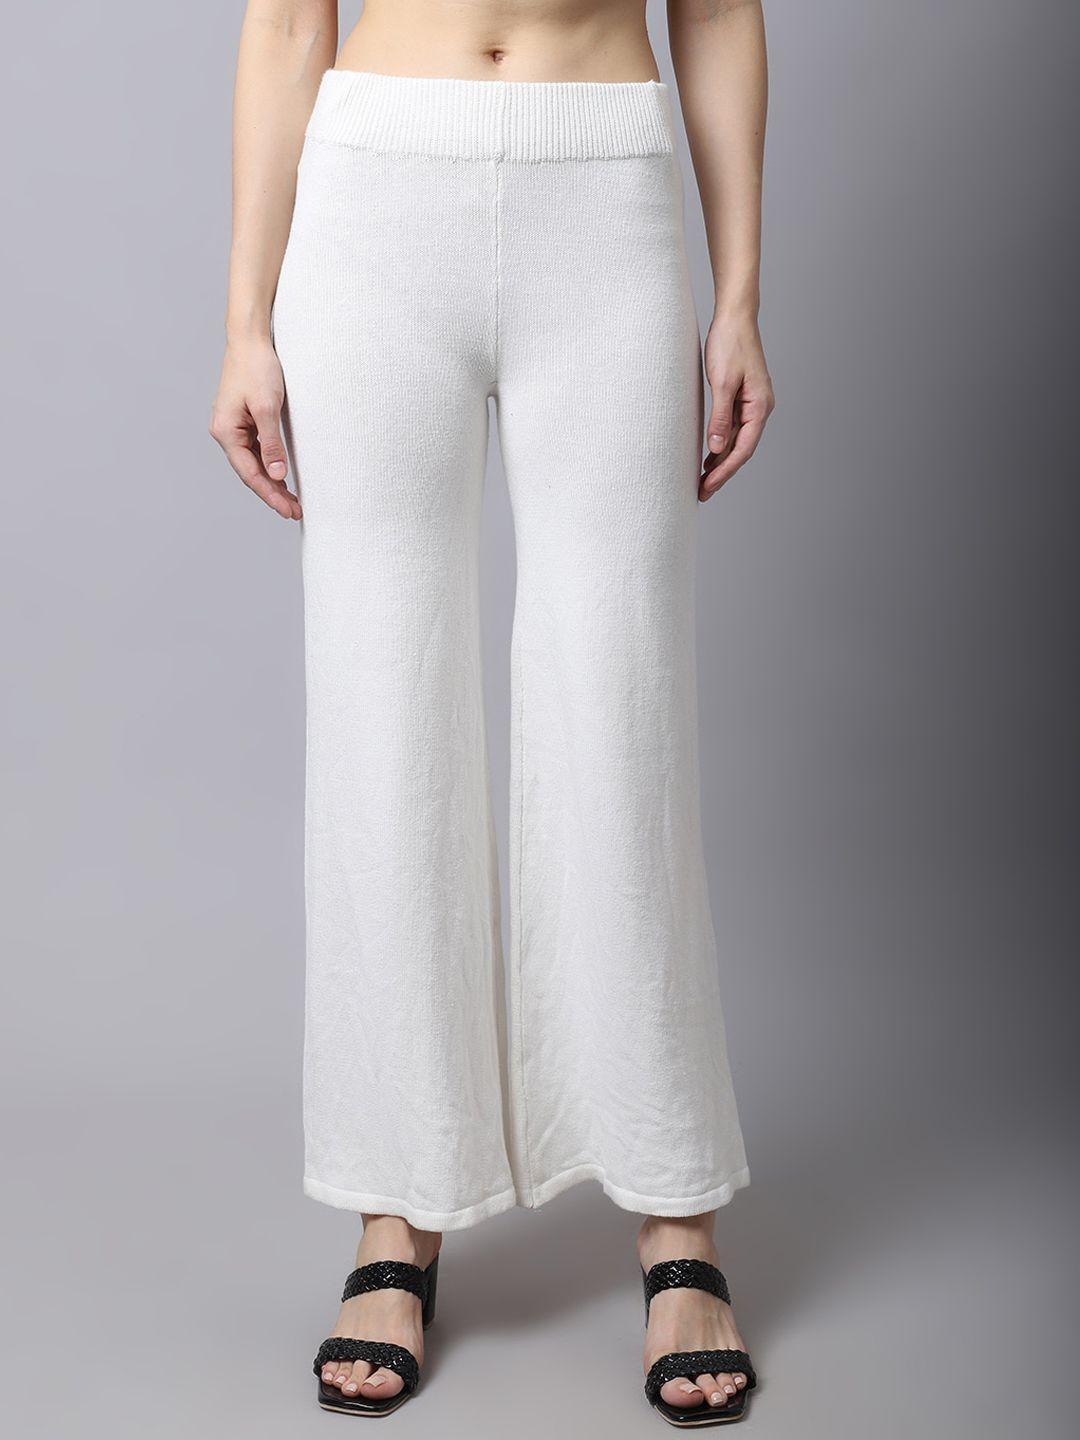 tag 7 women white relaxed straight leg flared trousers